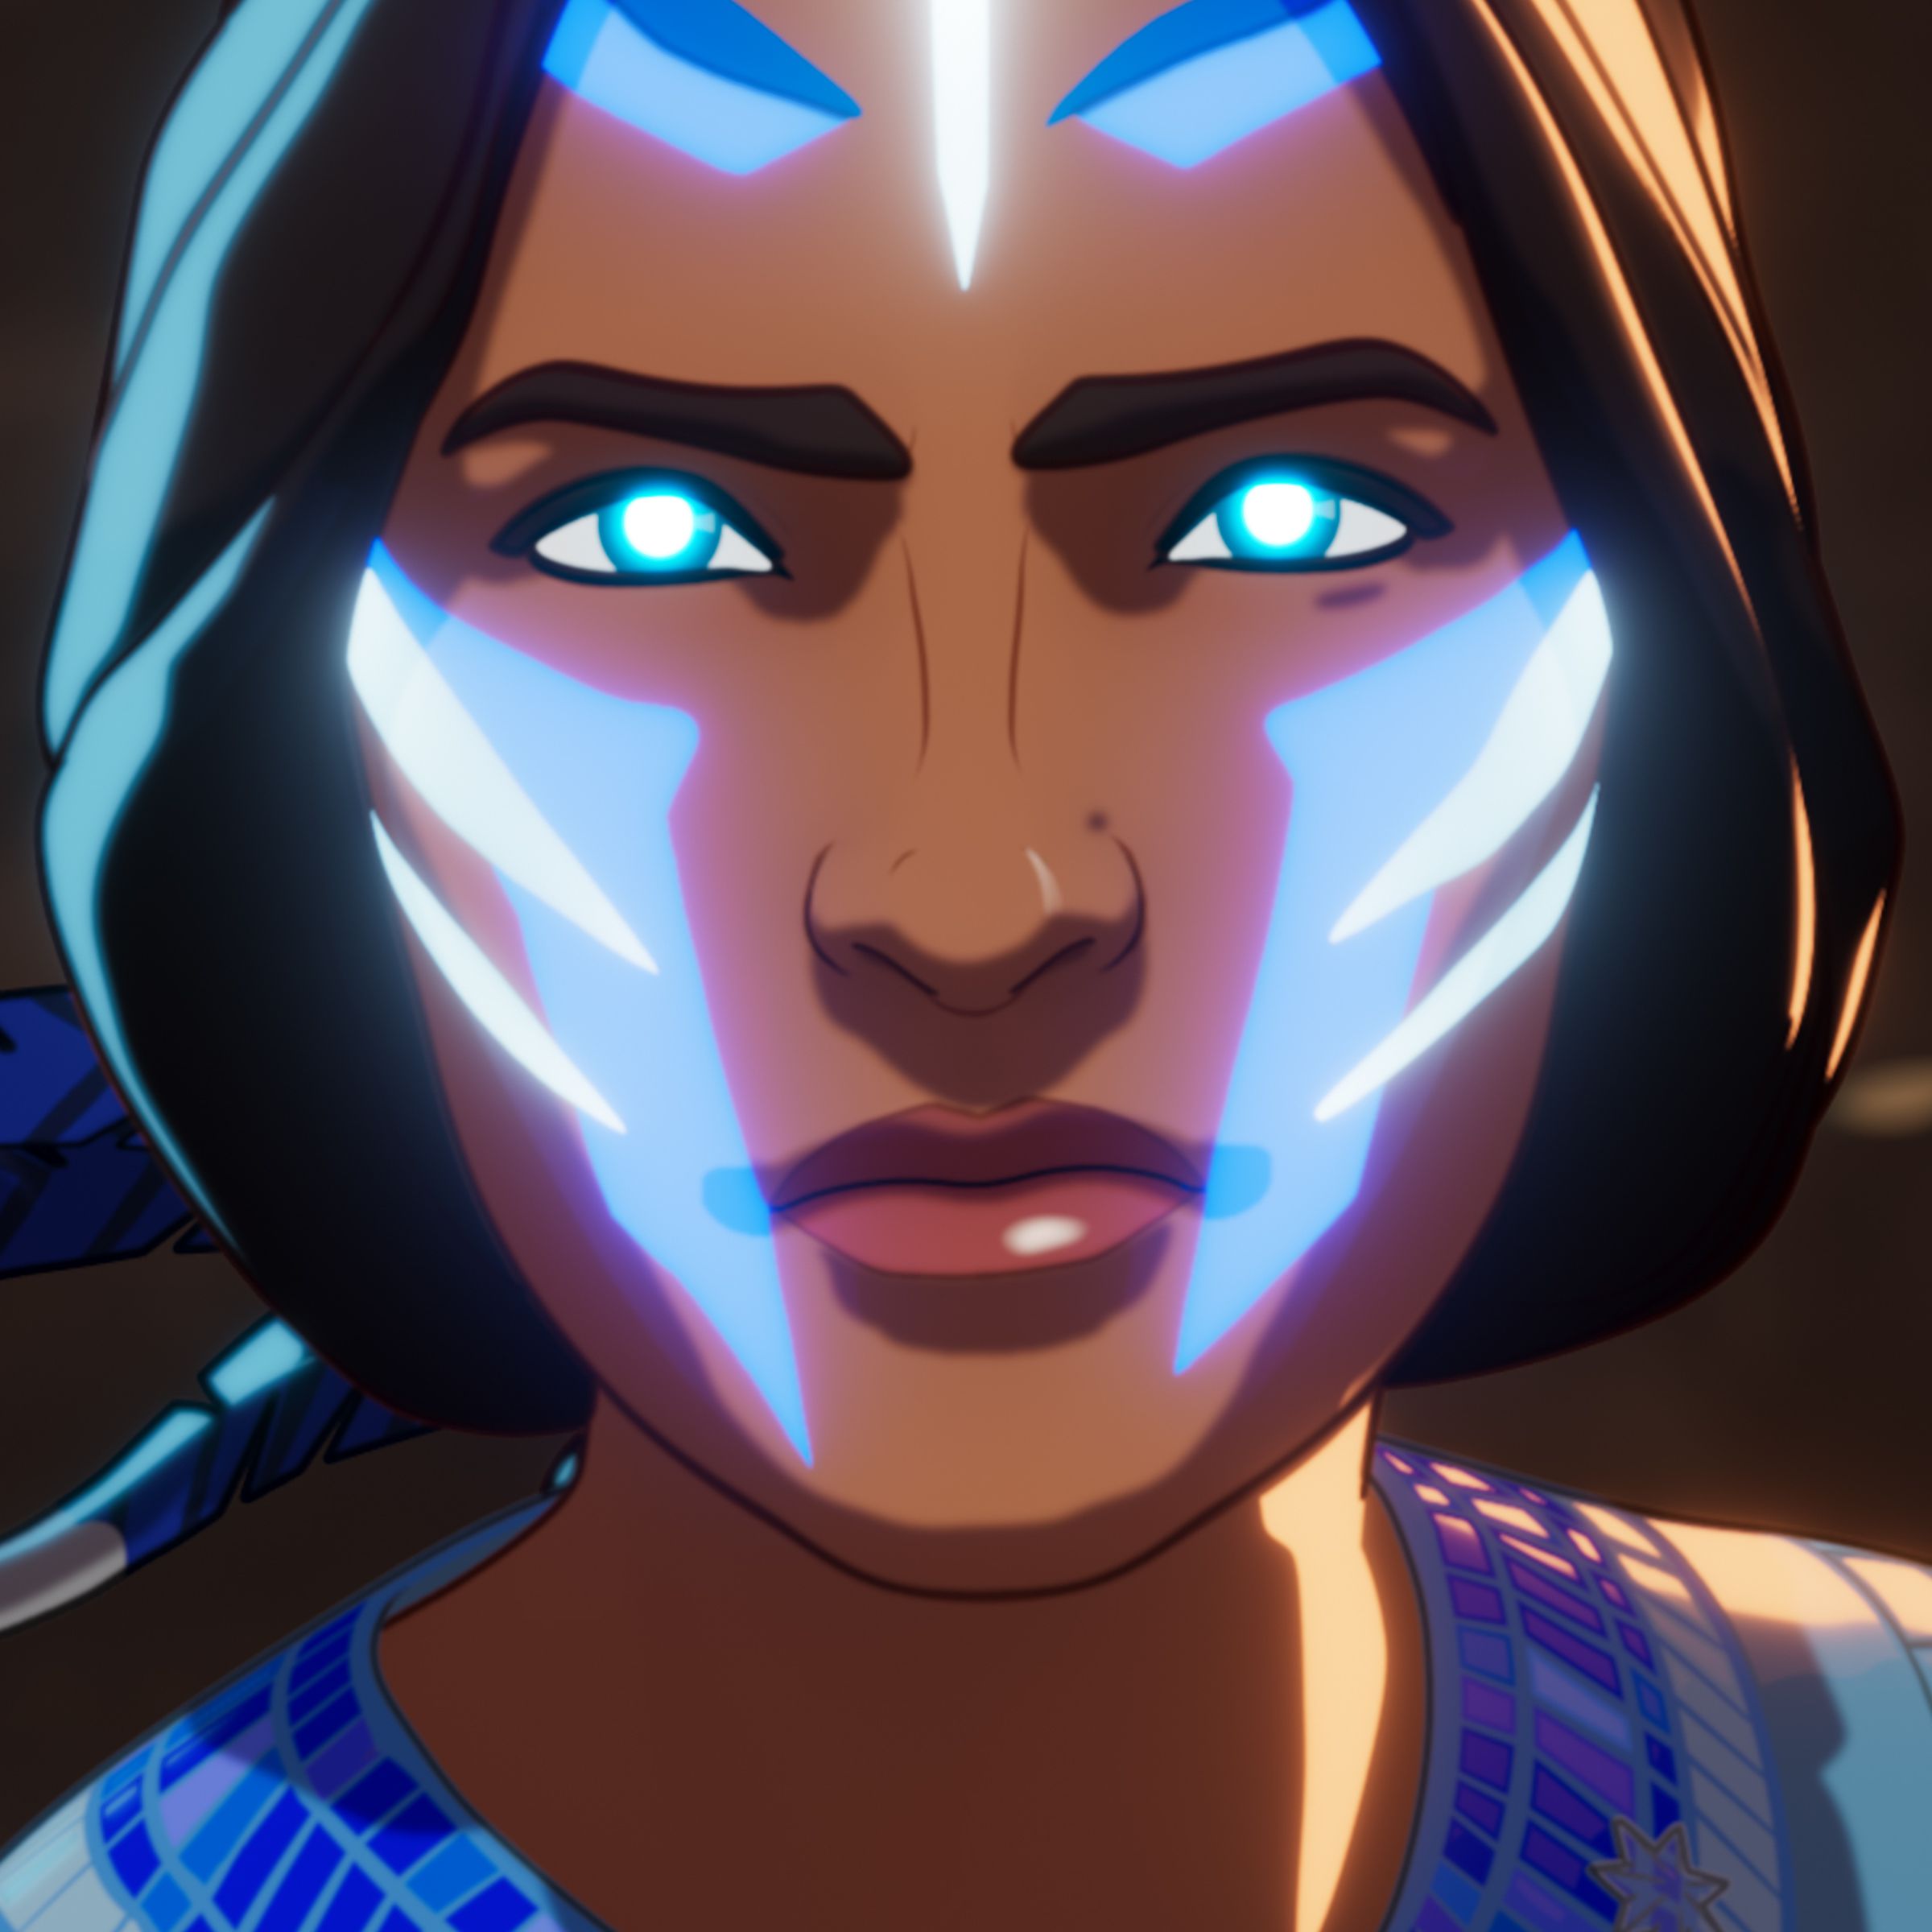 A tight shot of a young Native American woman whose face is adorned in glowing blue and white markings.